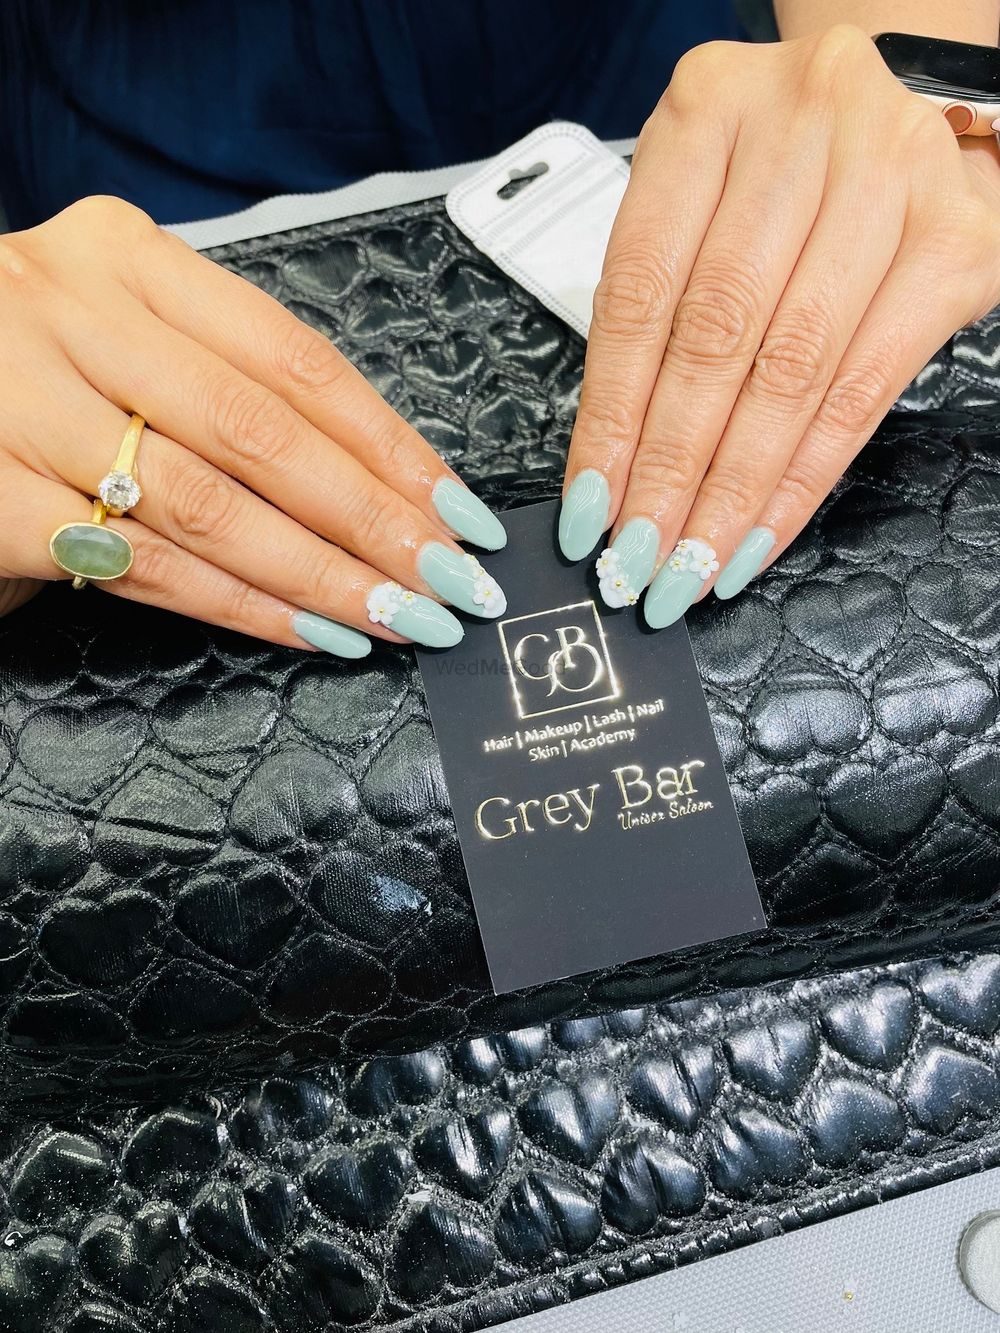 Photo From NAIL EXTENSIONS  - By Grey Bar Unisex Salon